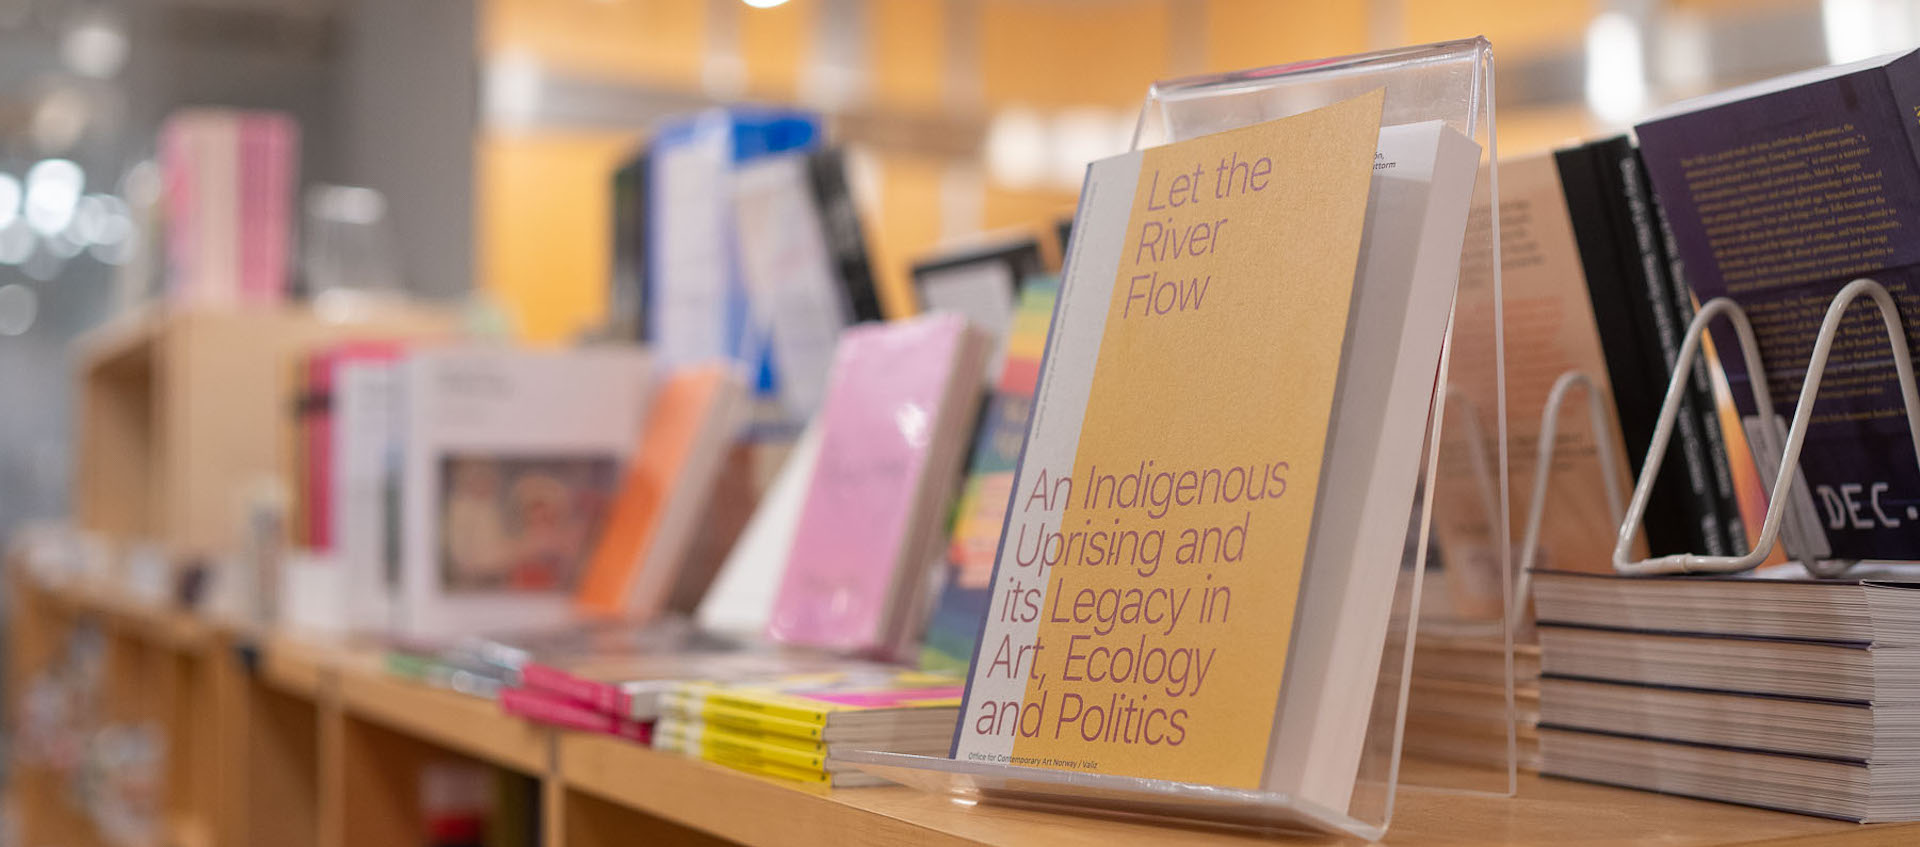 A row of books, some propped up and some resting flat, sit on top of light wood shelving in the Wexner Center Store. 